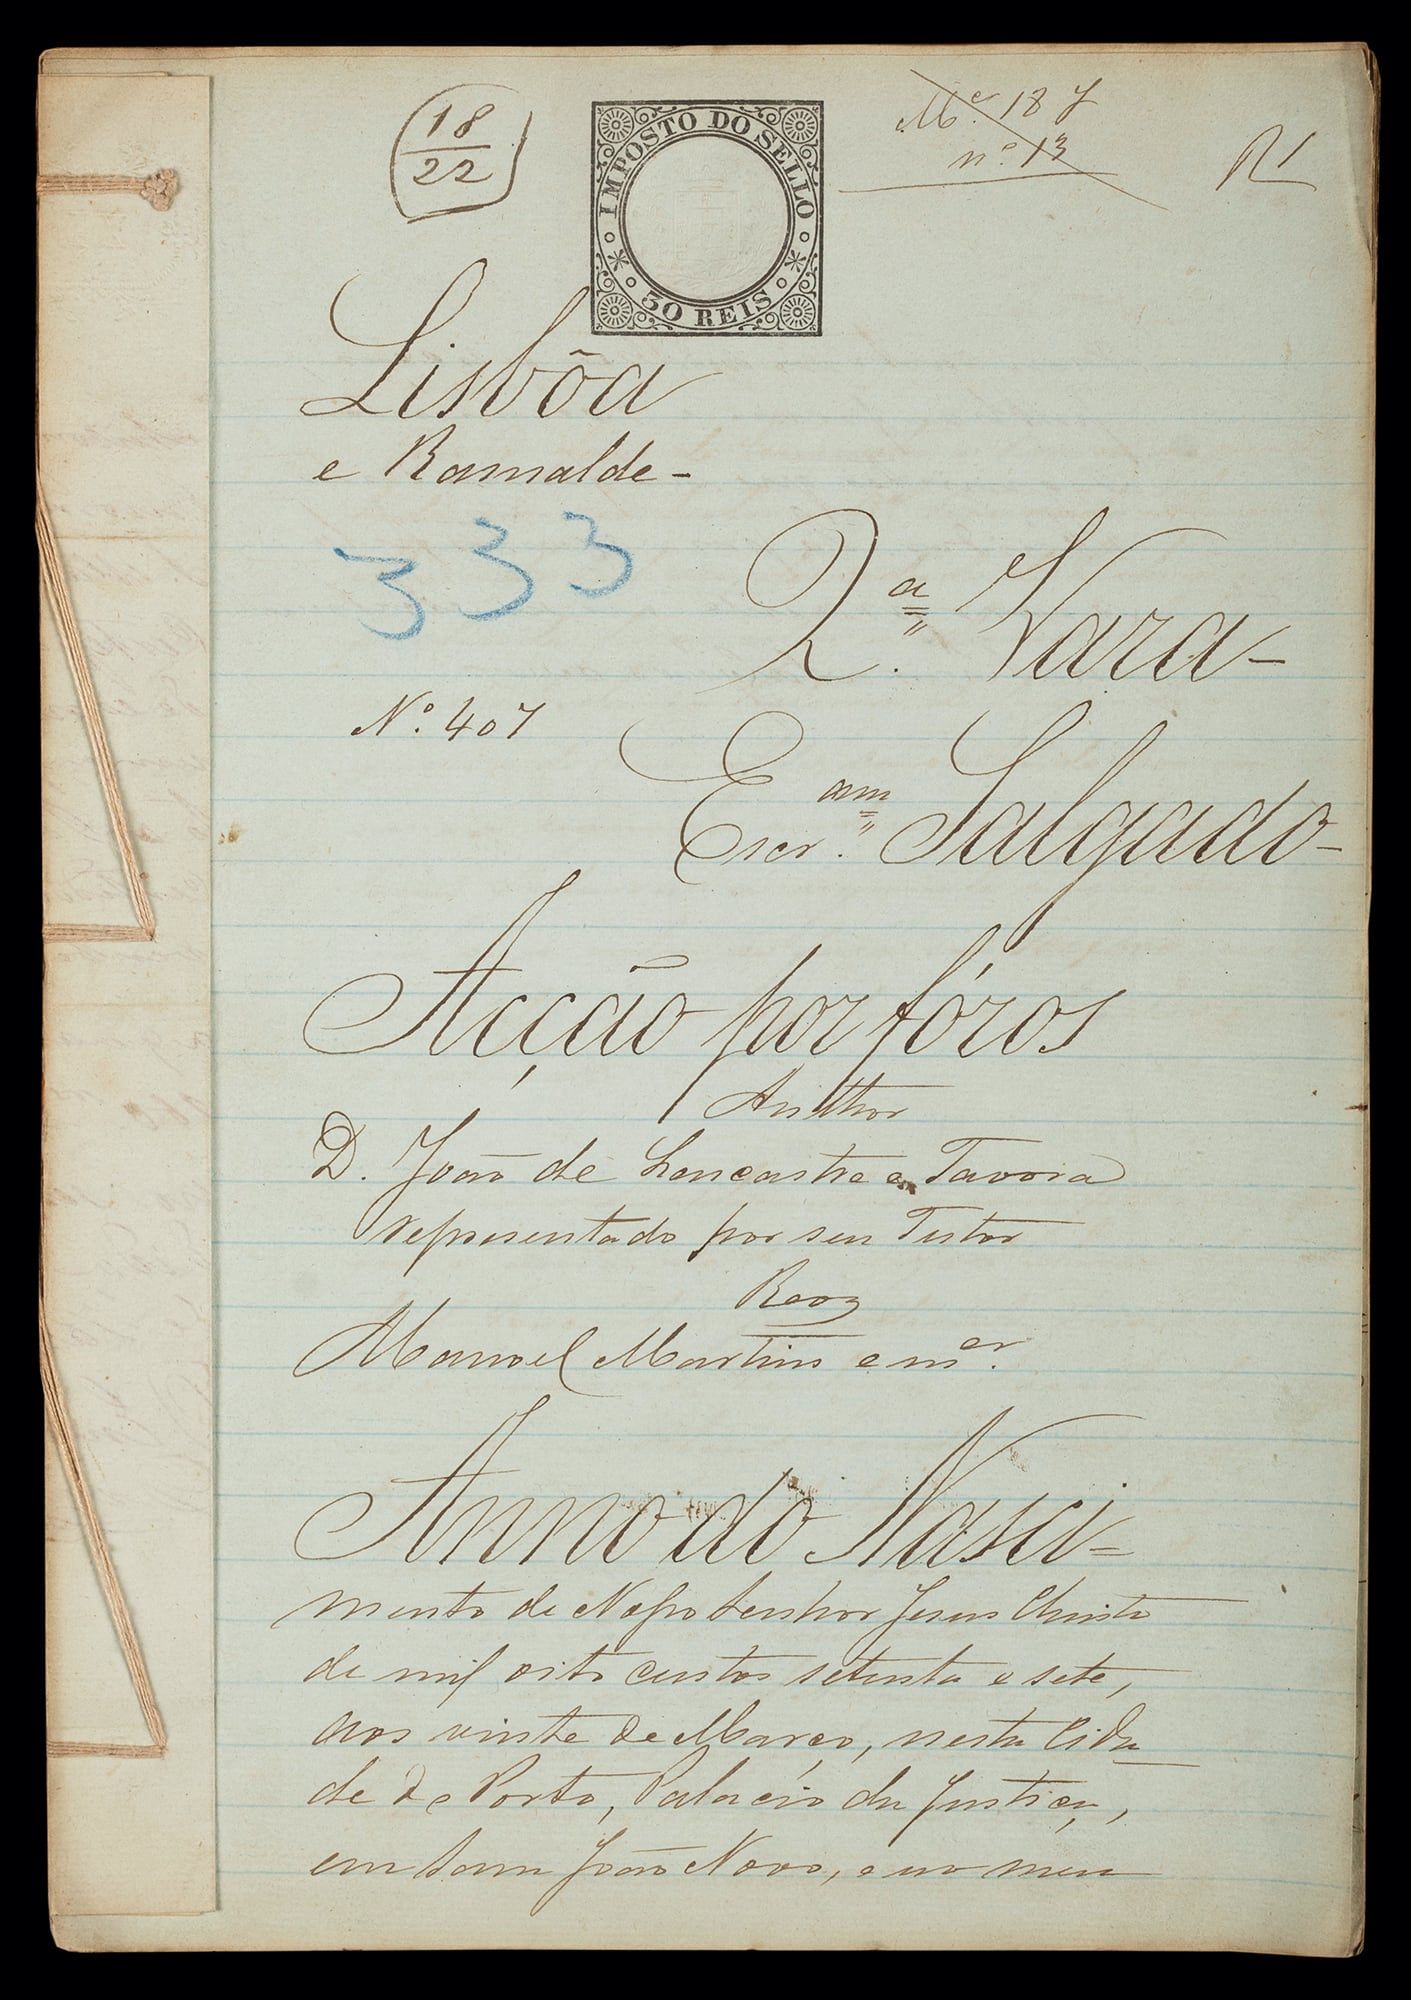 1877-03-20 LAWSUIT FOR NON-PAYMENT OF RENT